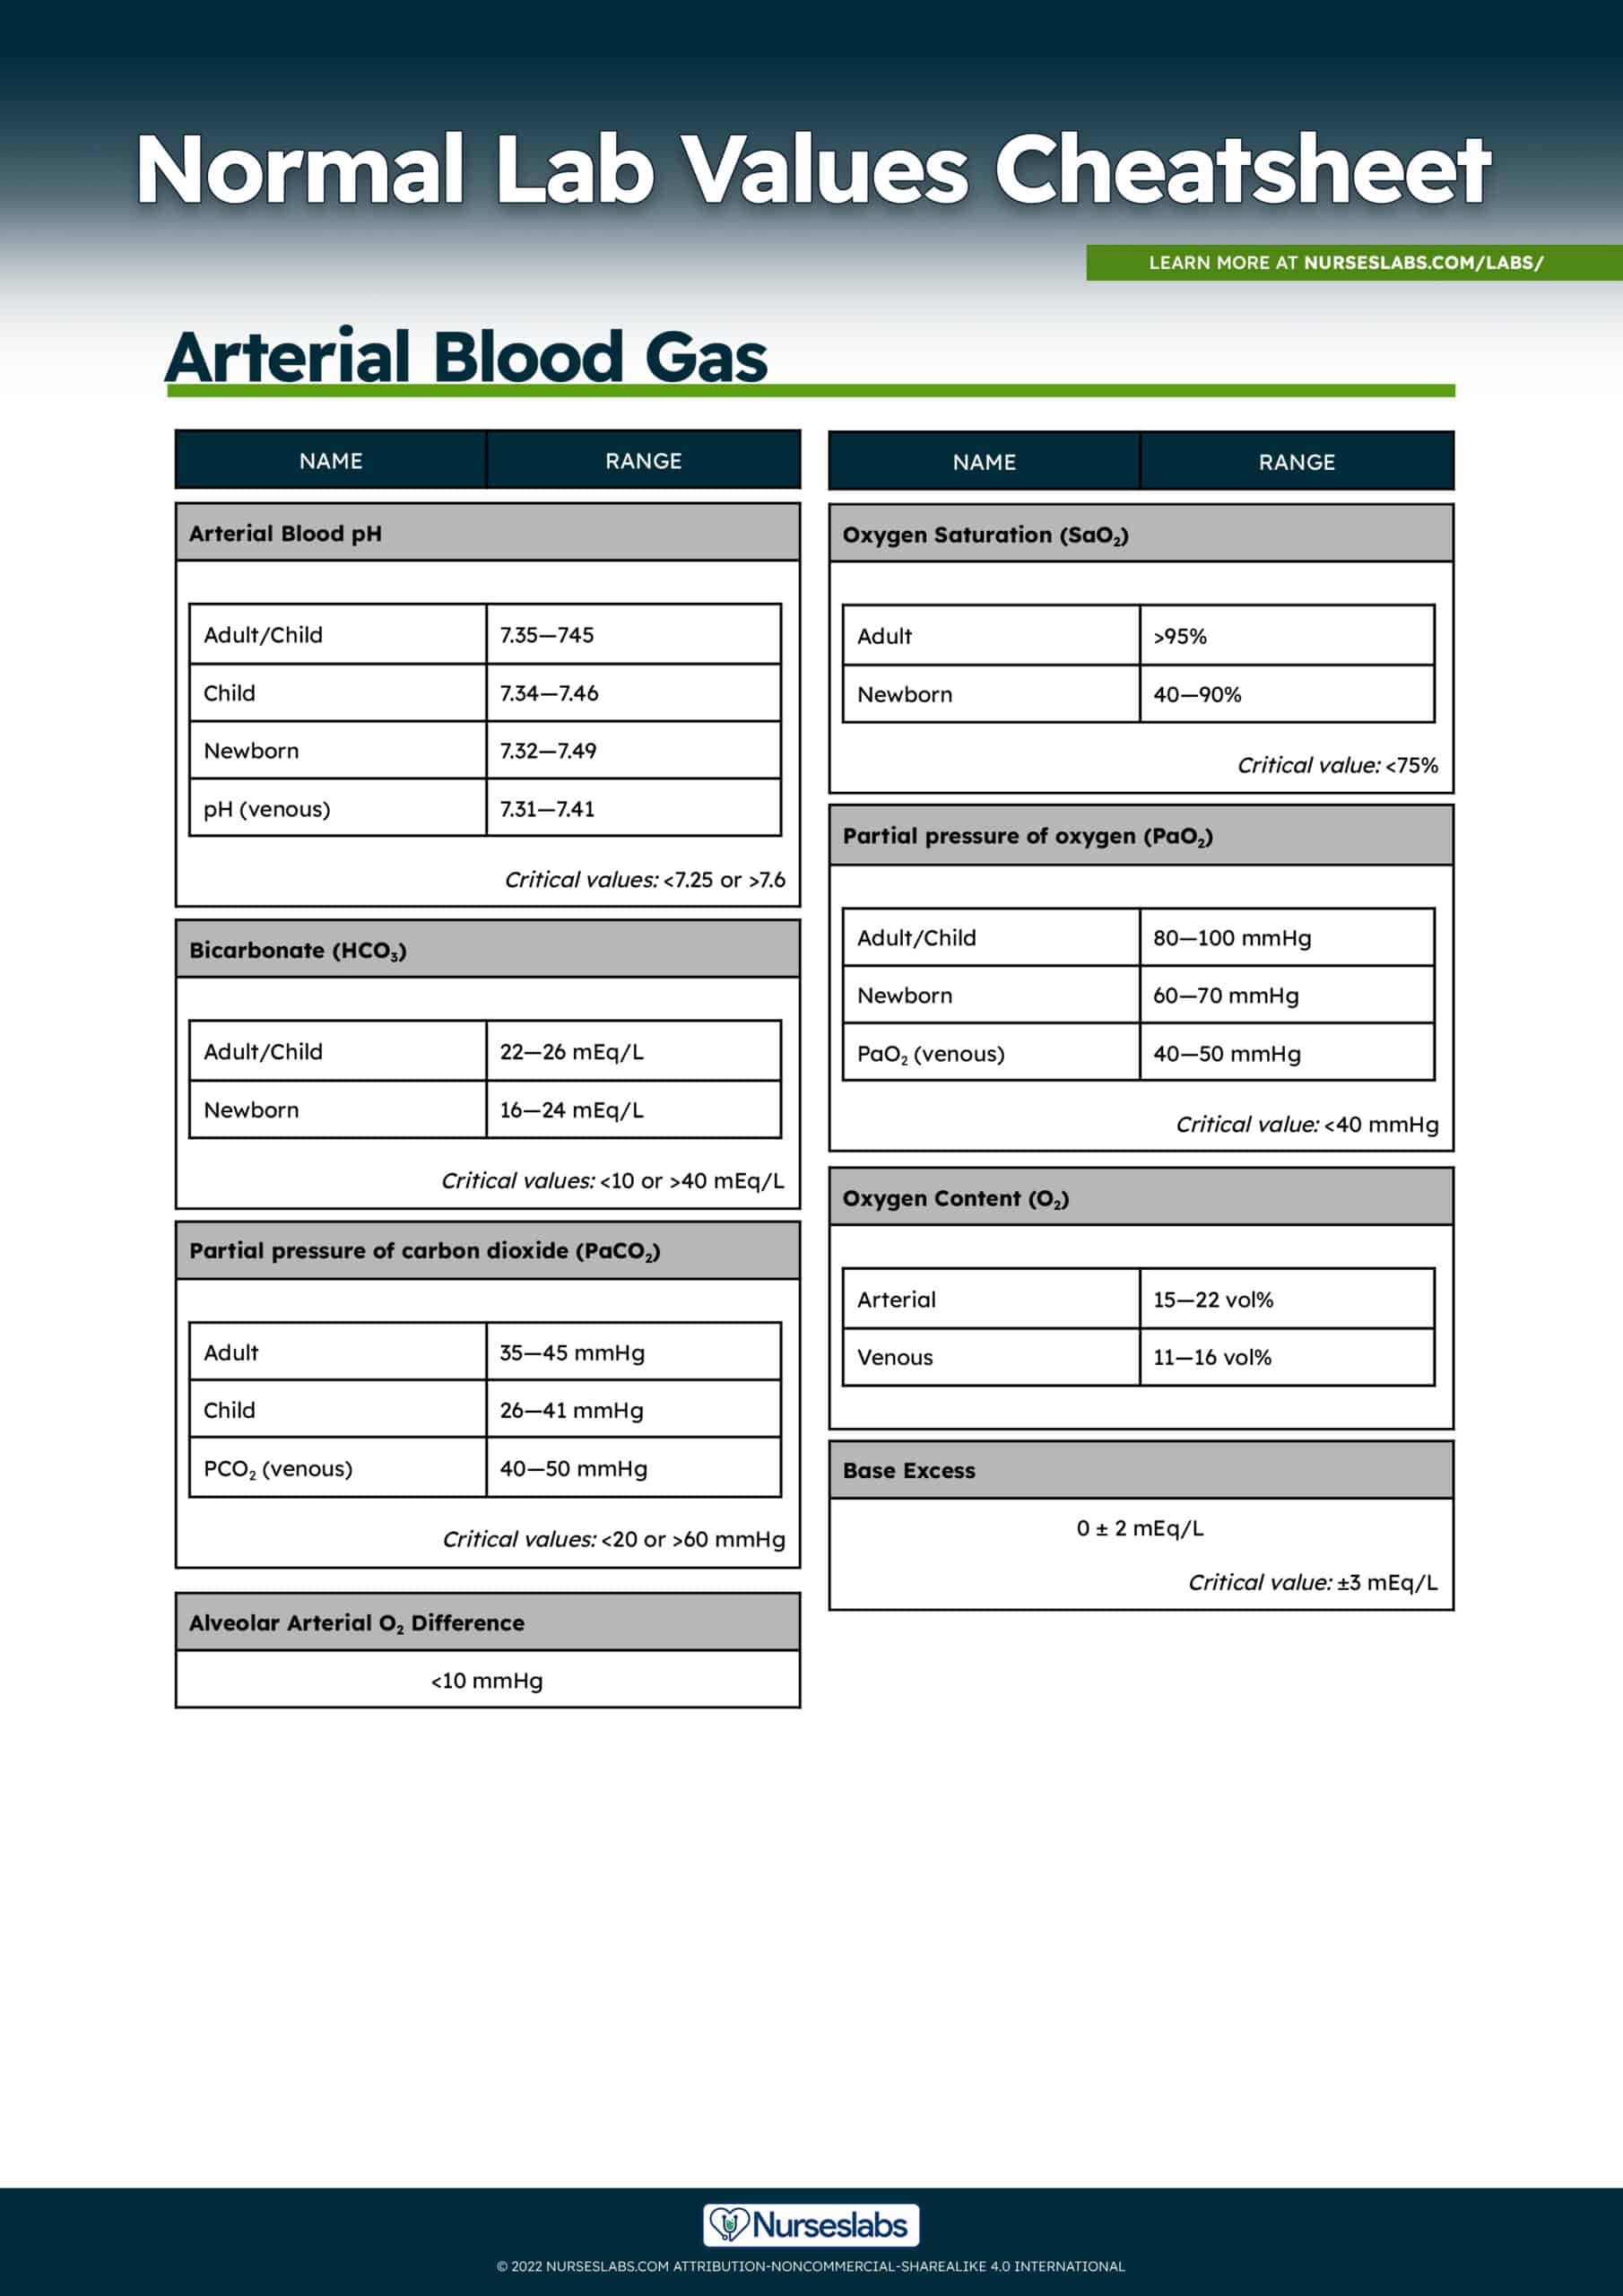 Normal Lab Values for Arterial Blood Gas